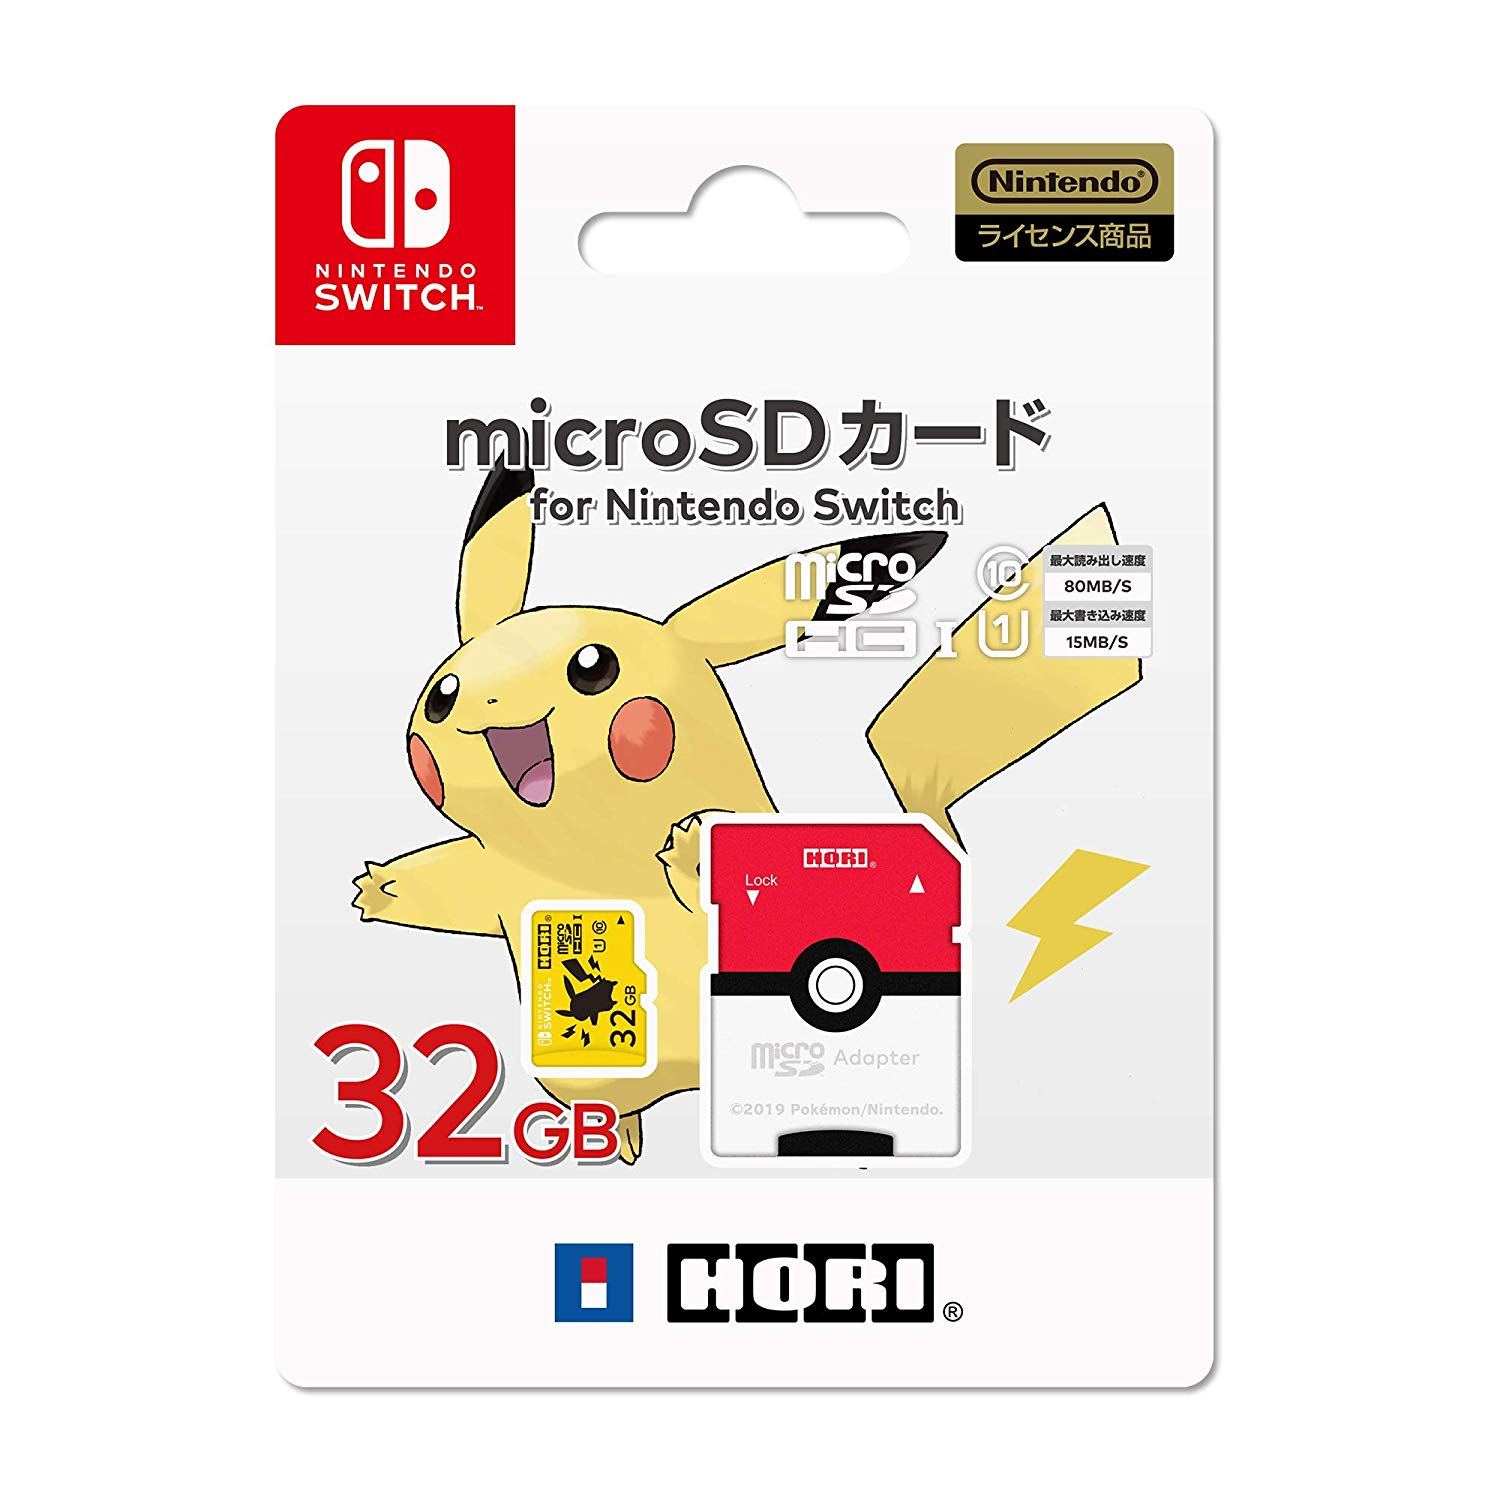 Pokemon Micro SD Card for Nintendo Switch 32 GB (Pikachu) for Nintendo  Switch - Bitcoin & Lightning accepted